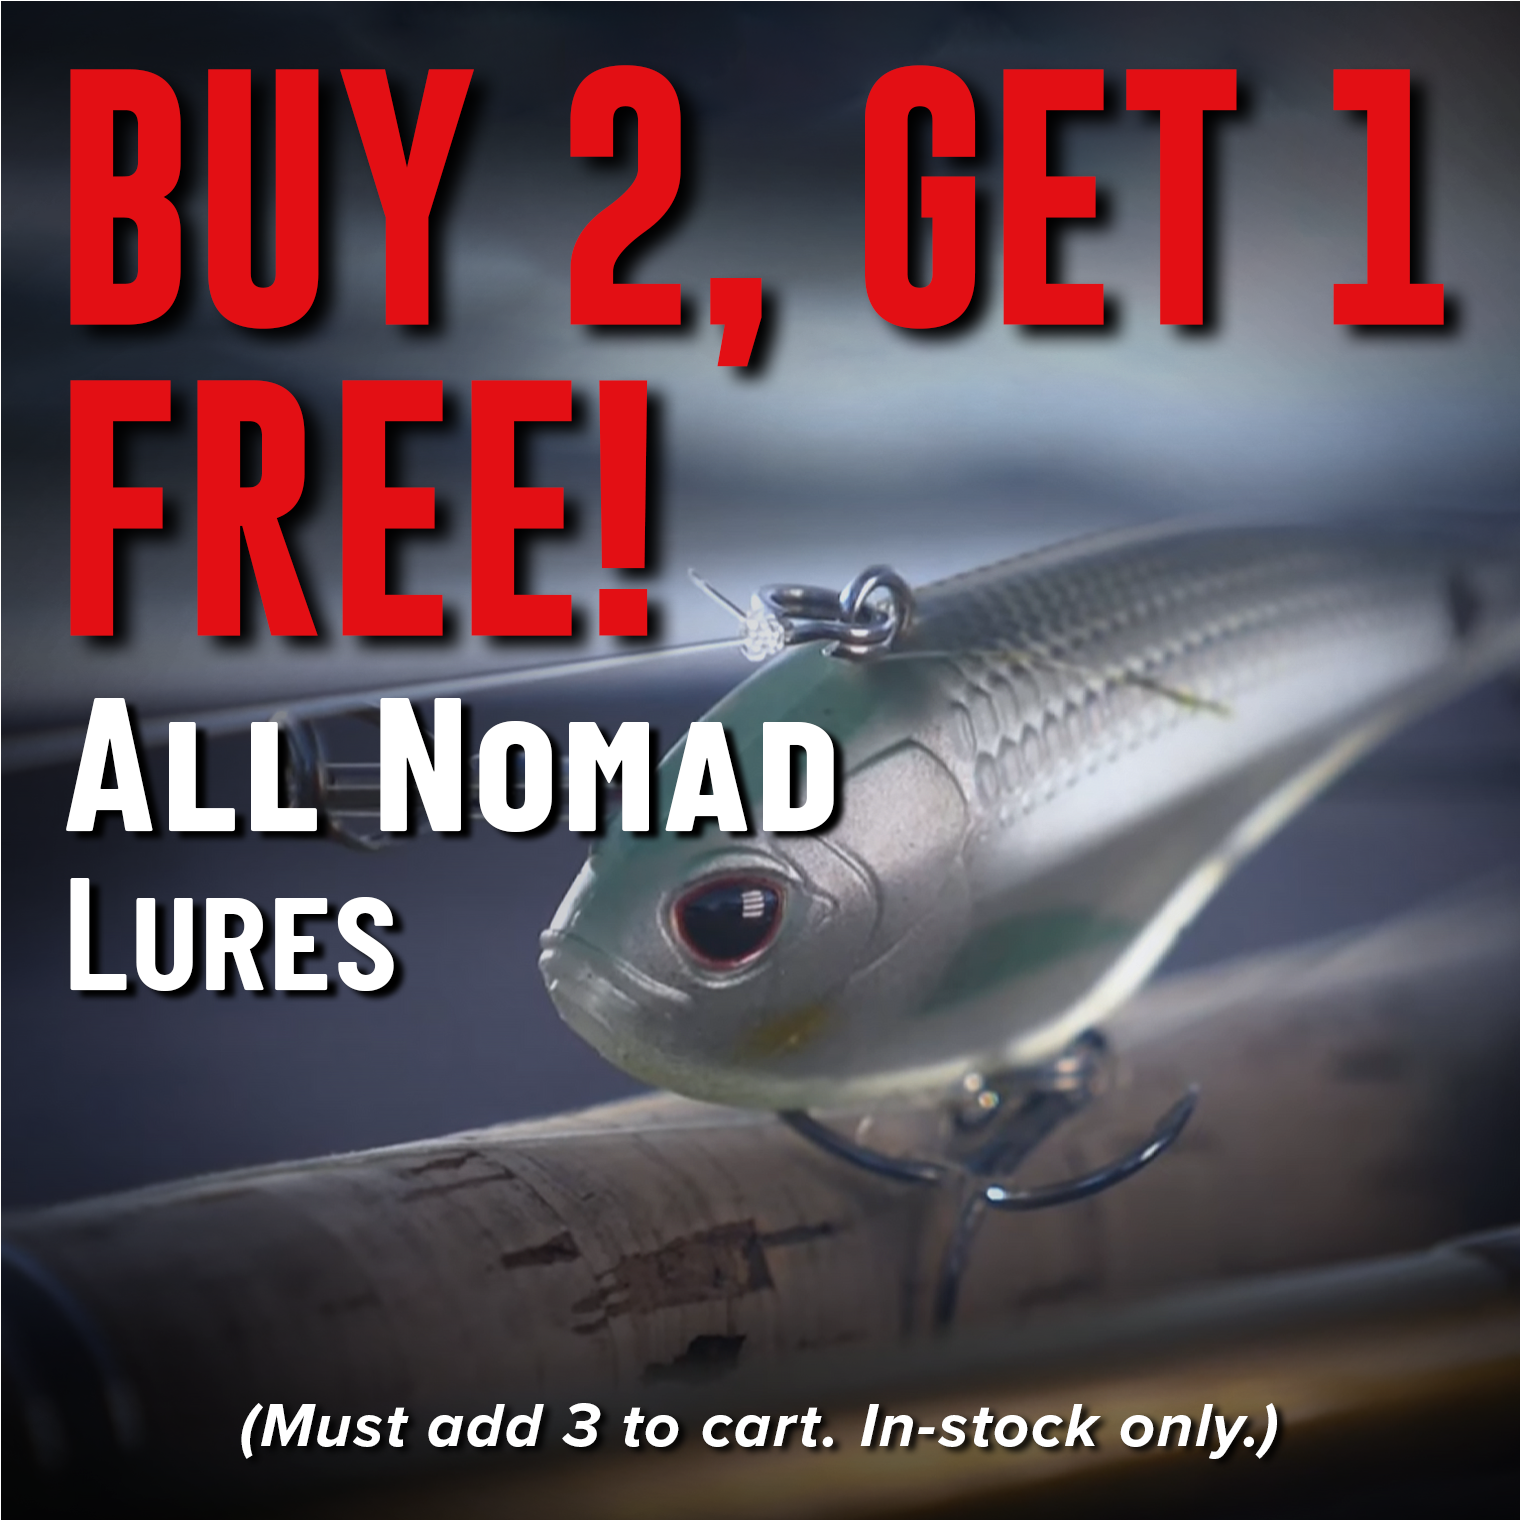 Buy 2, Get 1 Free! All Nomad Lures (Must add 3 to cart. In-stock only.)